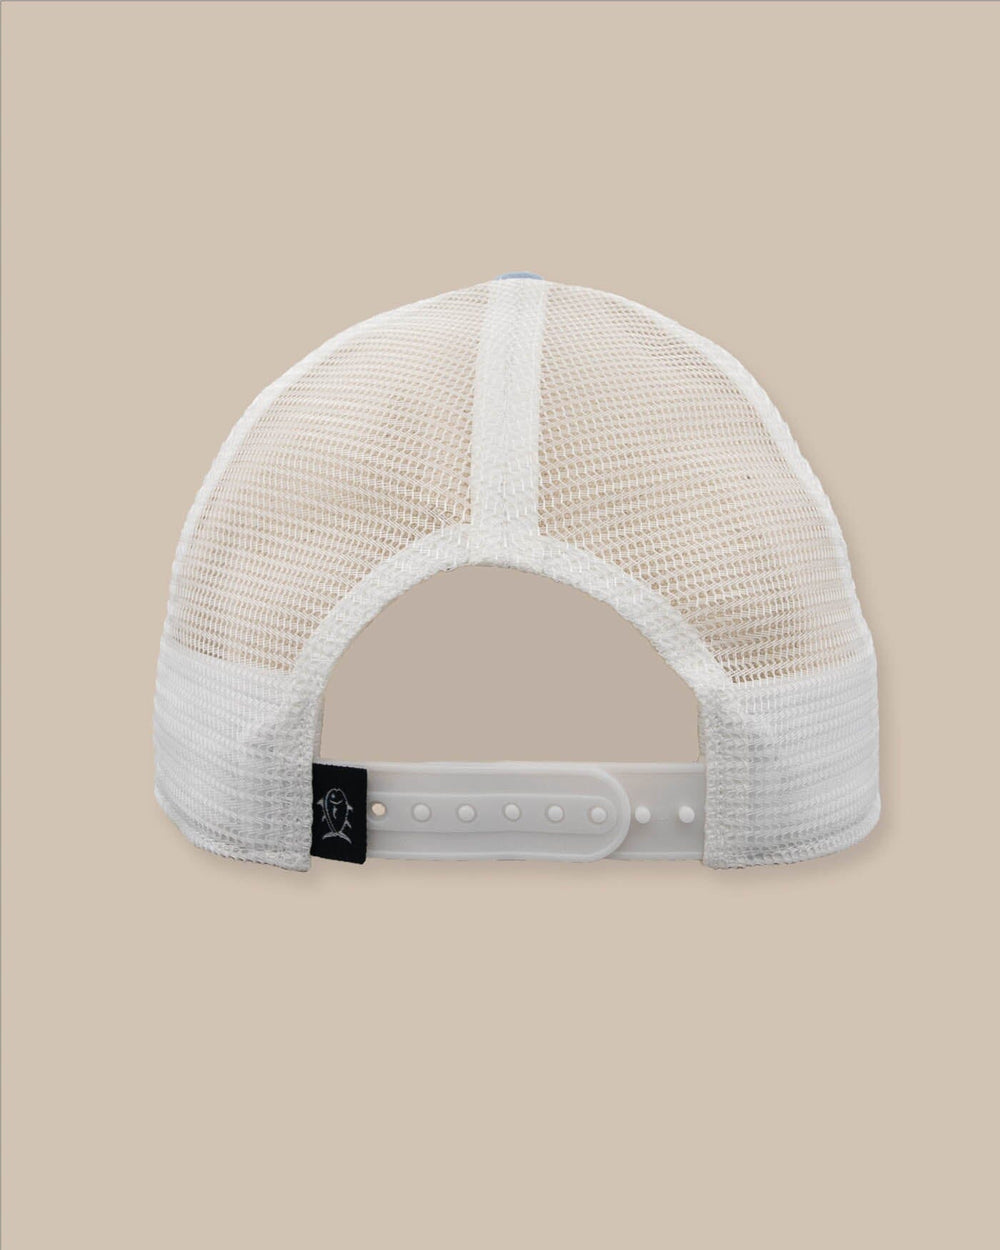 The back view of the Southern Tide Shackleford Trucker Hat by Southern Tide - Light Blue